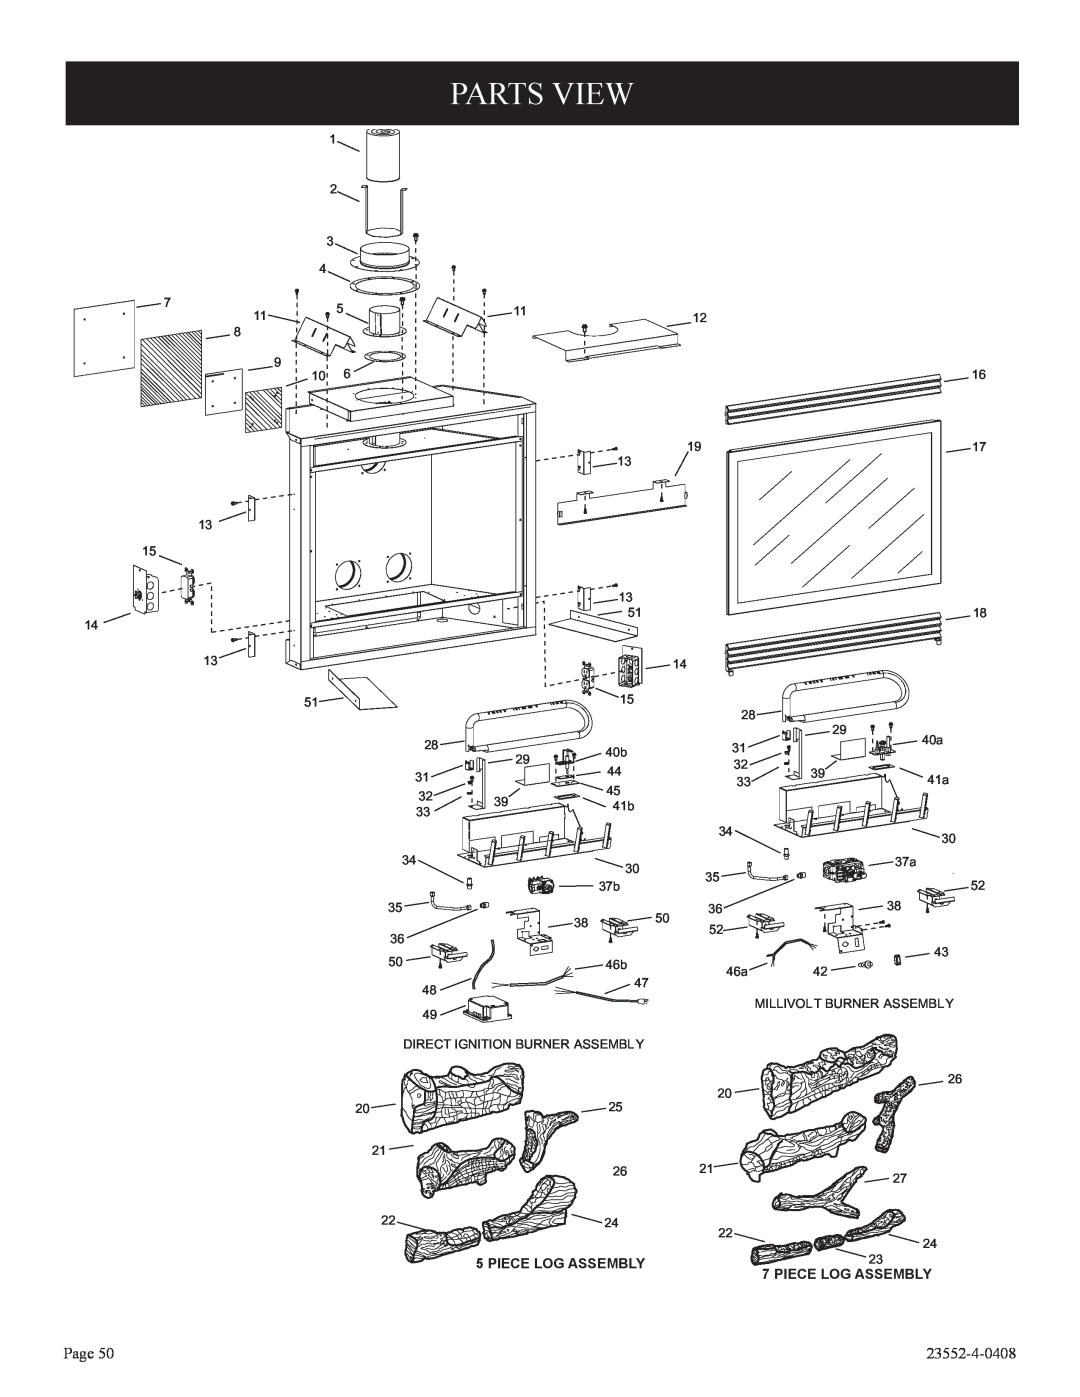 Empire Comfort Systems DVD32FP3, 1, 3)(N installation instructions Parts View, Page, 23552-4-0408, Piece Log Assembly 